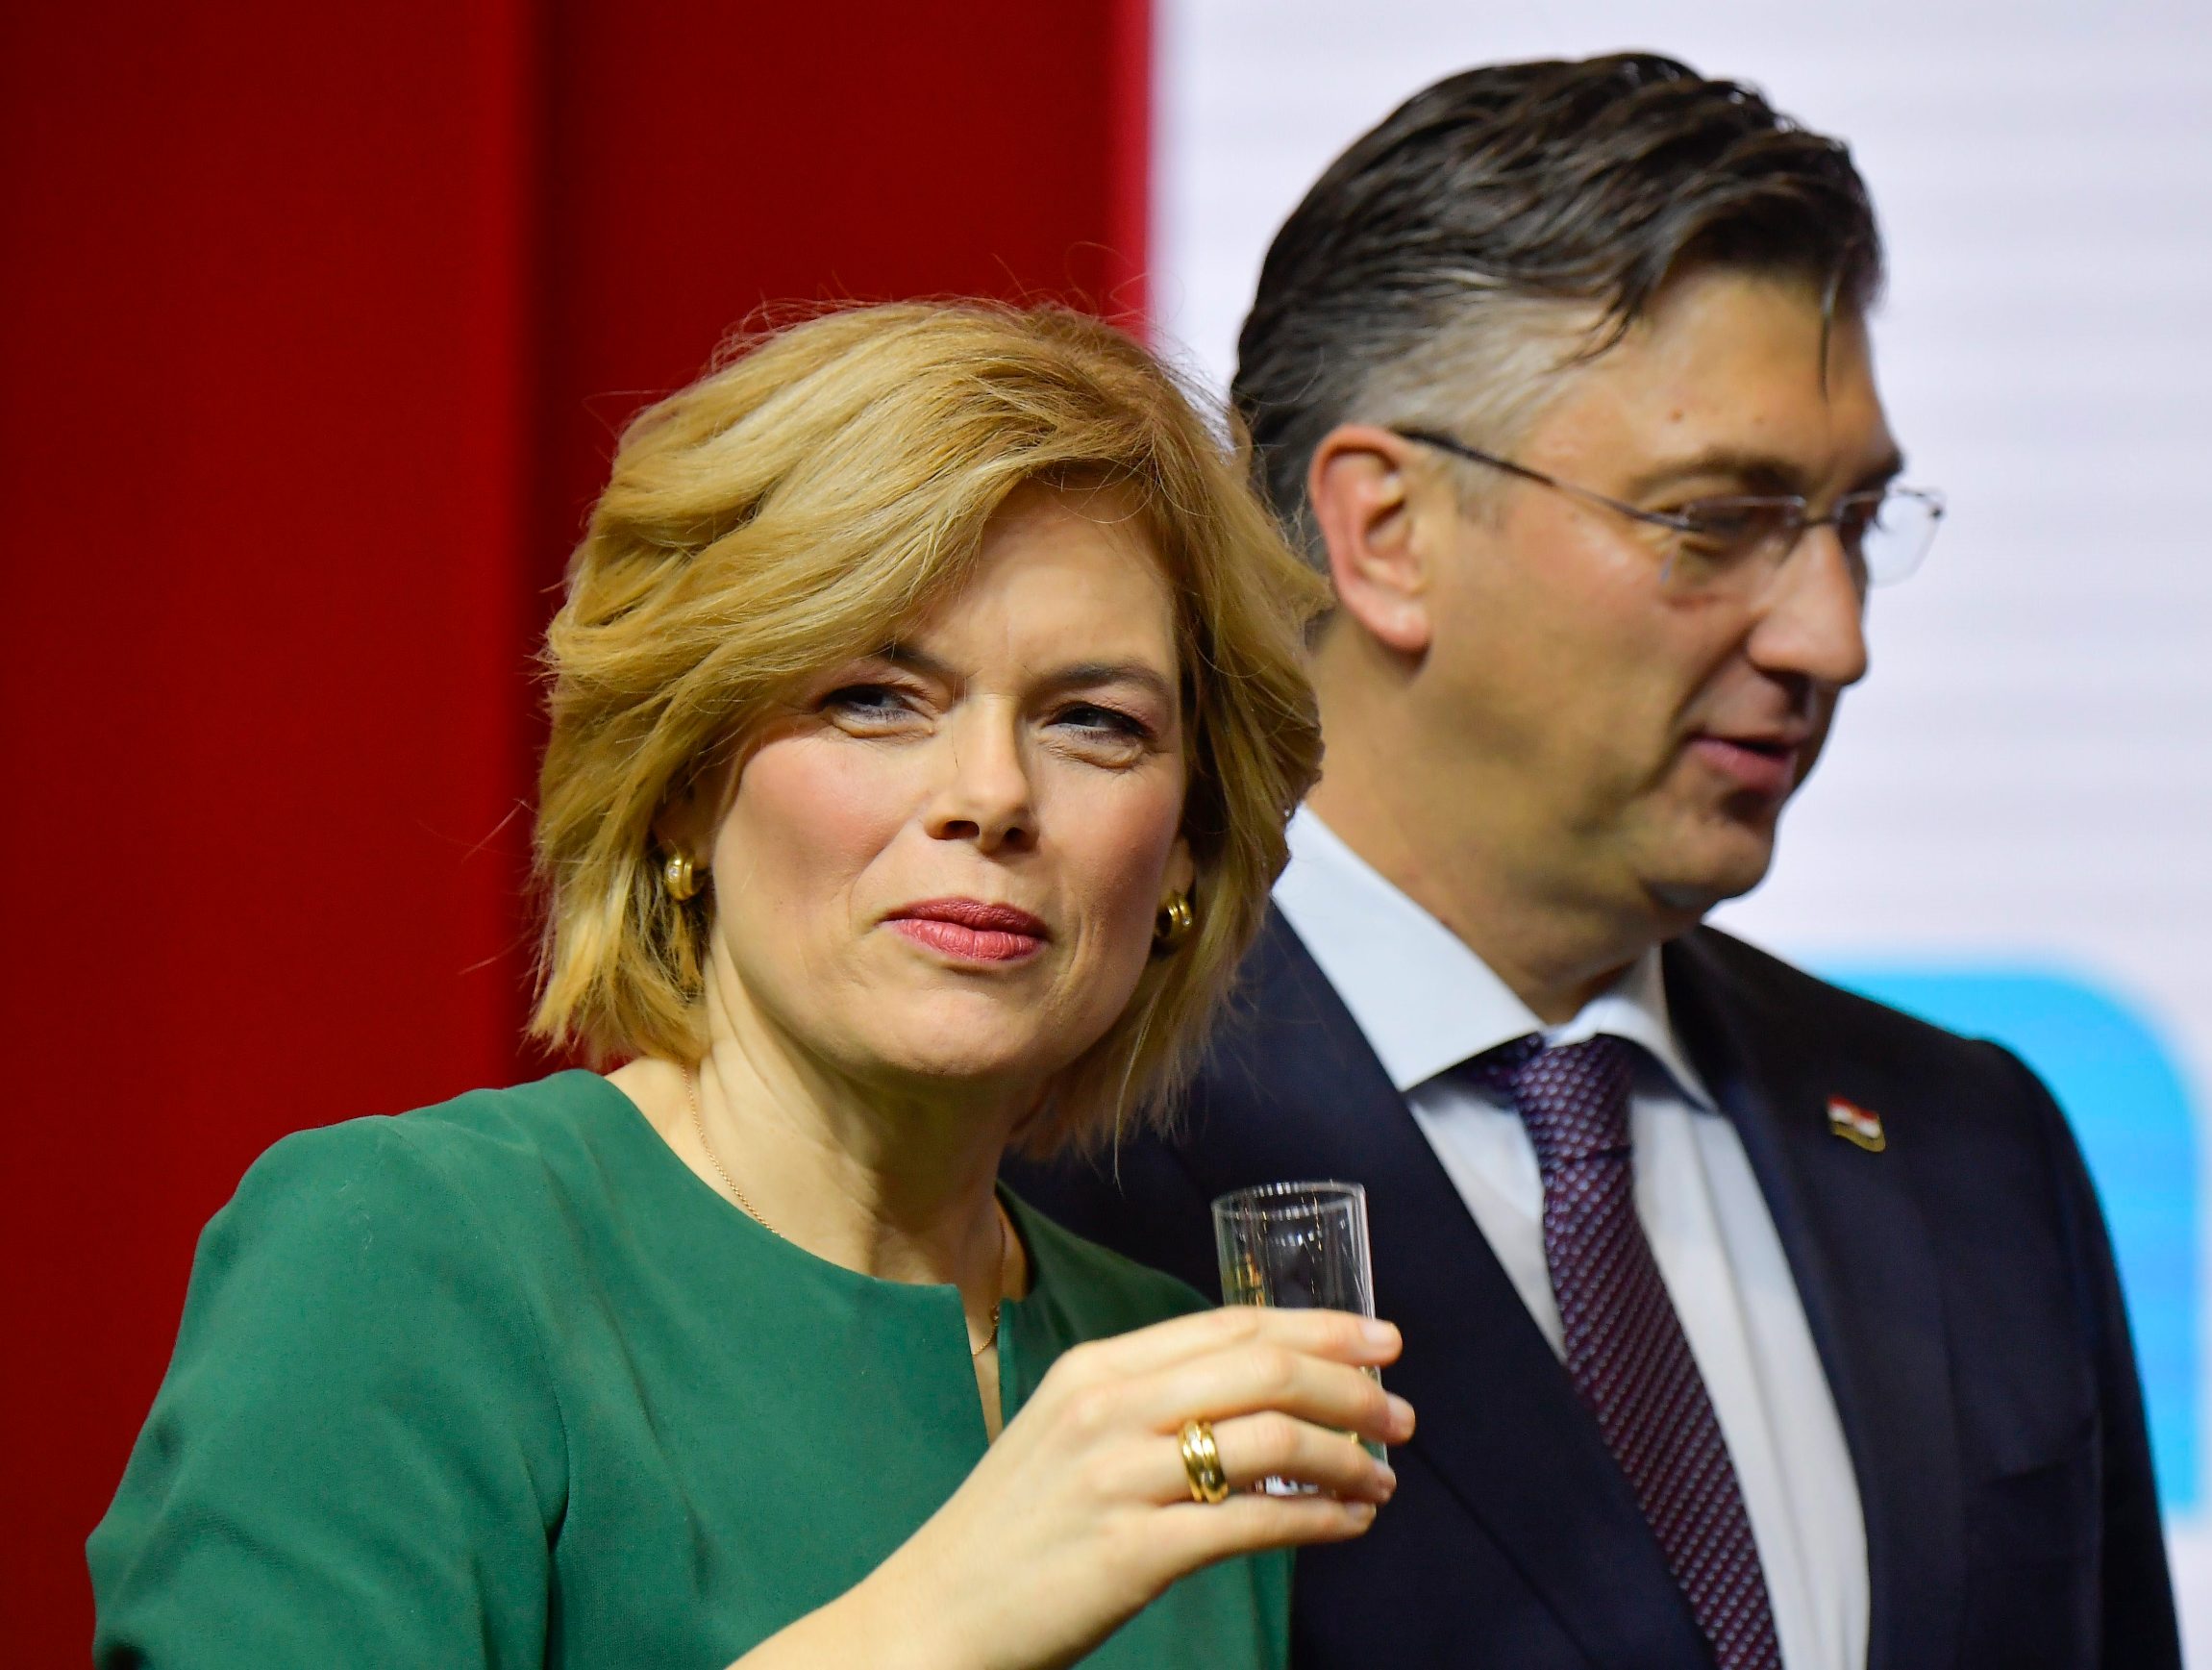 German Minister for Food and Agriculture Julia Kloeckner tastes a drink as she and Croatia's Prime Minister Andrej Plenkovic open the Gruene Woche (Green Week) international agriculture fair in Berlin on January 17, 2020. - The fair officially opens on January 17, 2020 and runs until January 26, with Croatia as partner country of the Green Week 2020. (Photo by Tobias SCHWARZ / AFP)